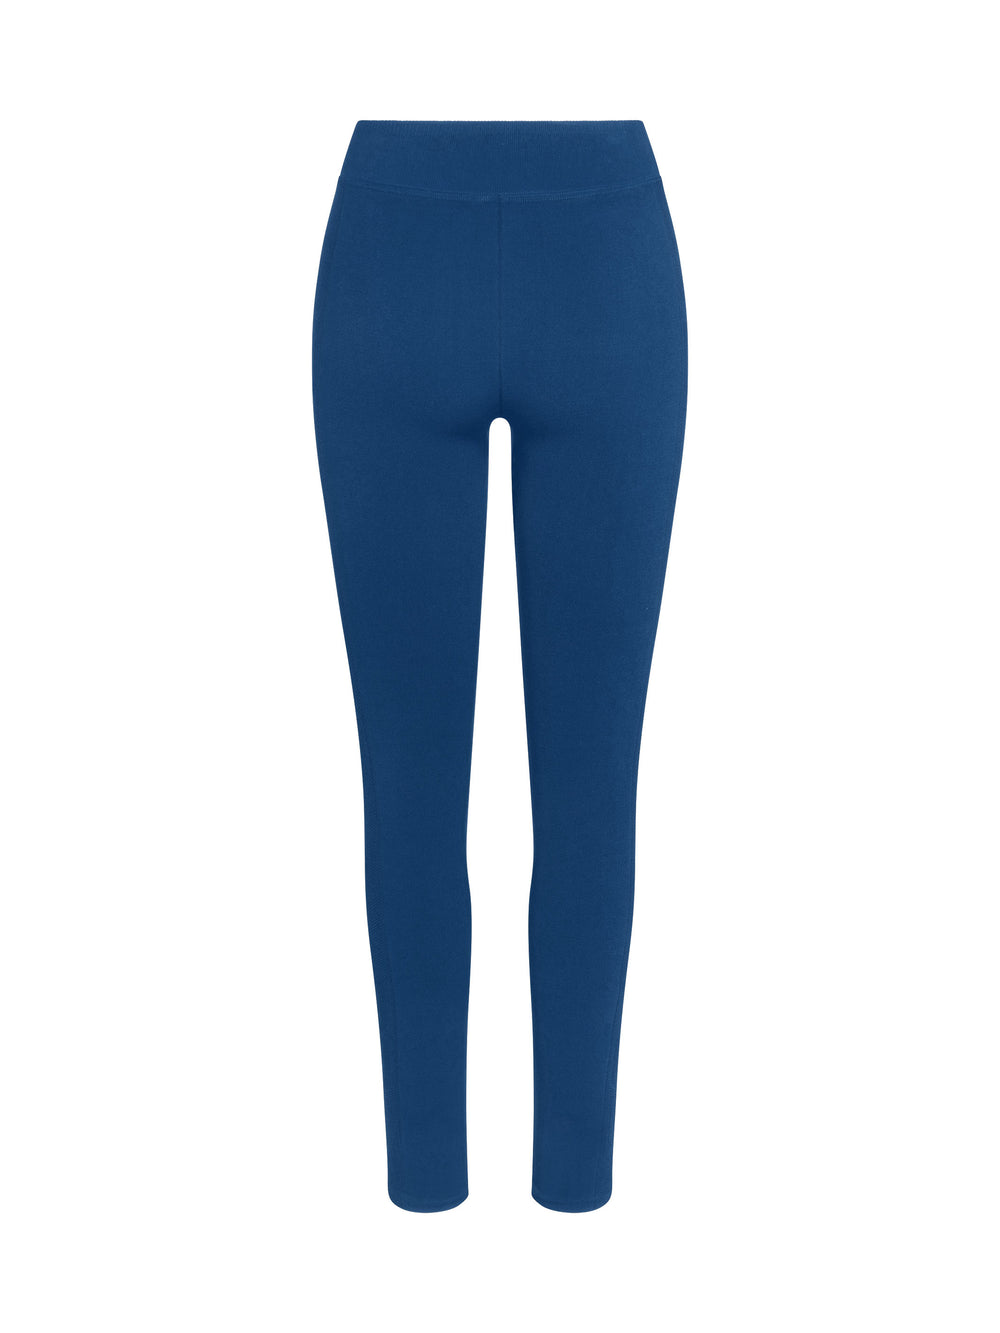 Women's 7/8 Seamless Compression Leggings back view  in Astral Blue